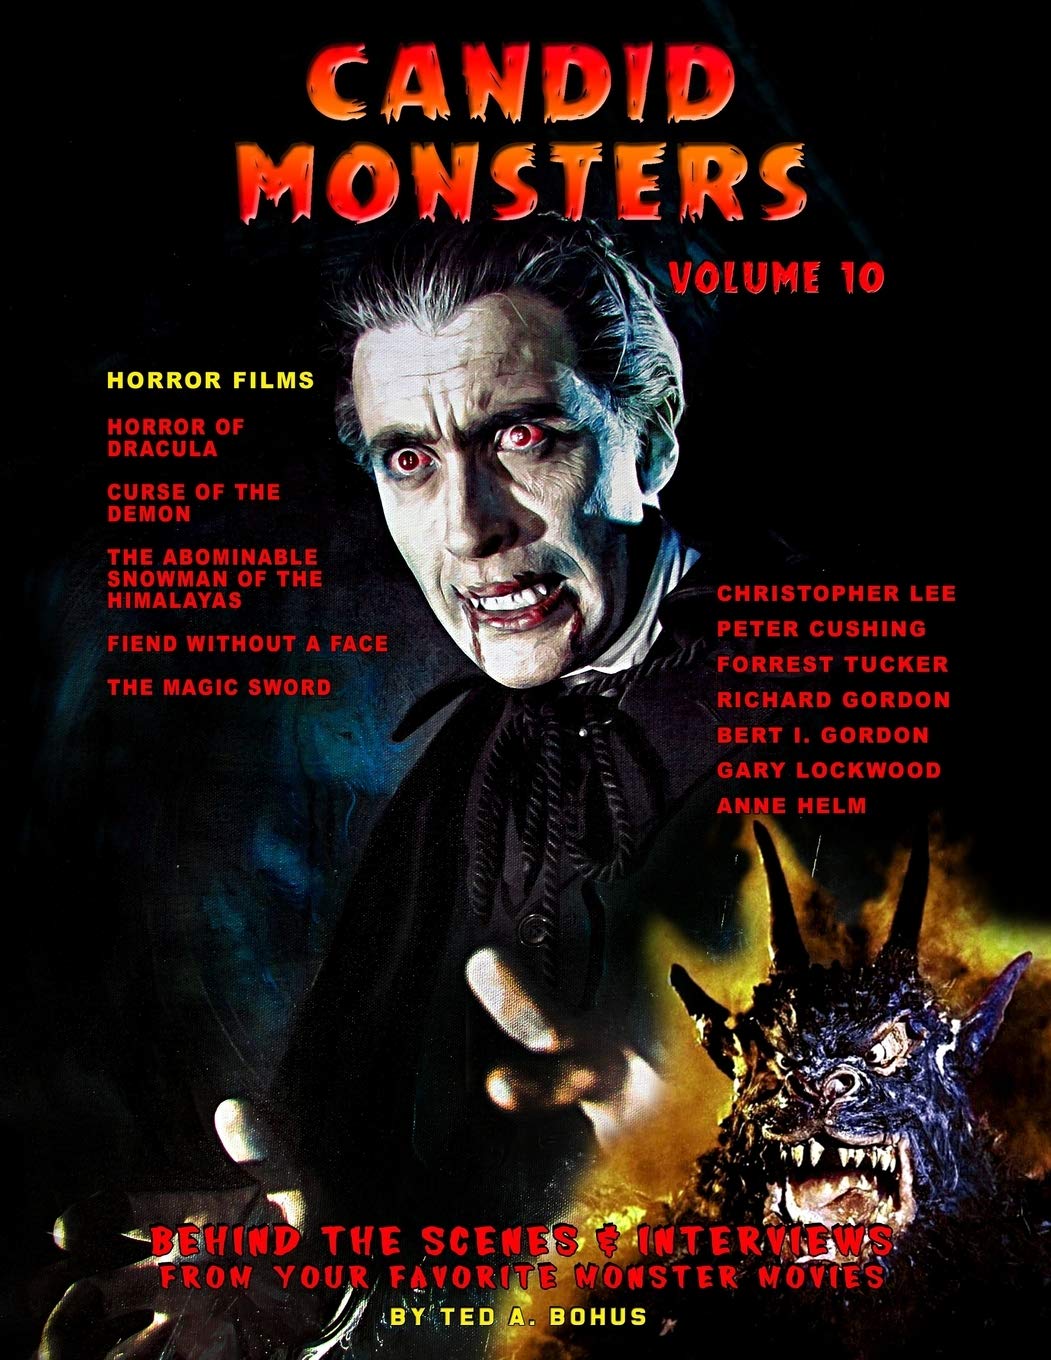 Candid Monsters Volume 10 Softcover Book by Ted Bohus